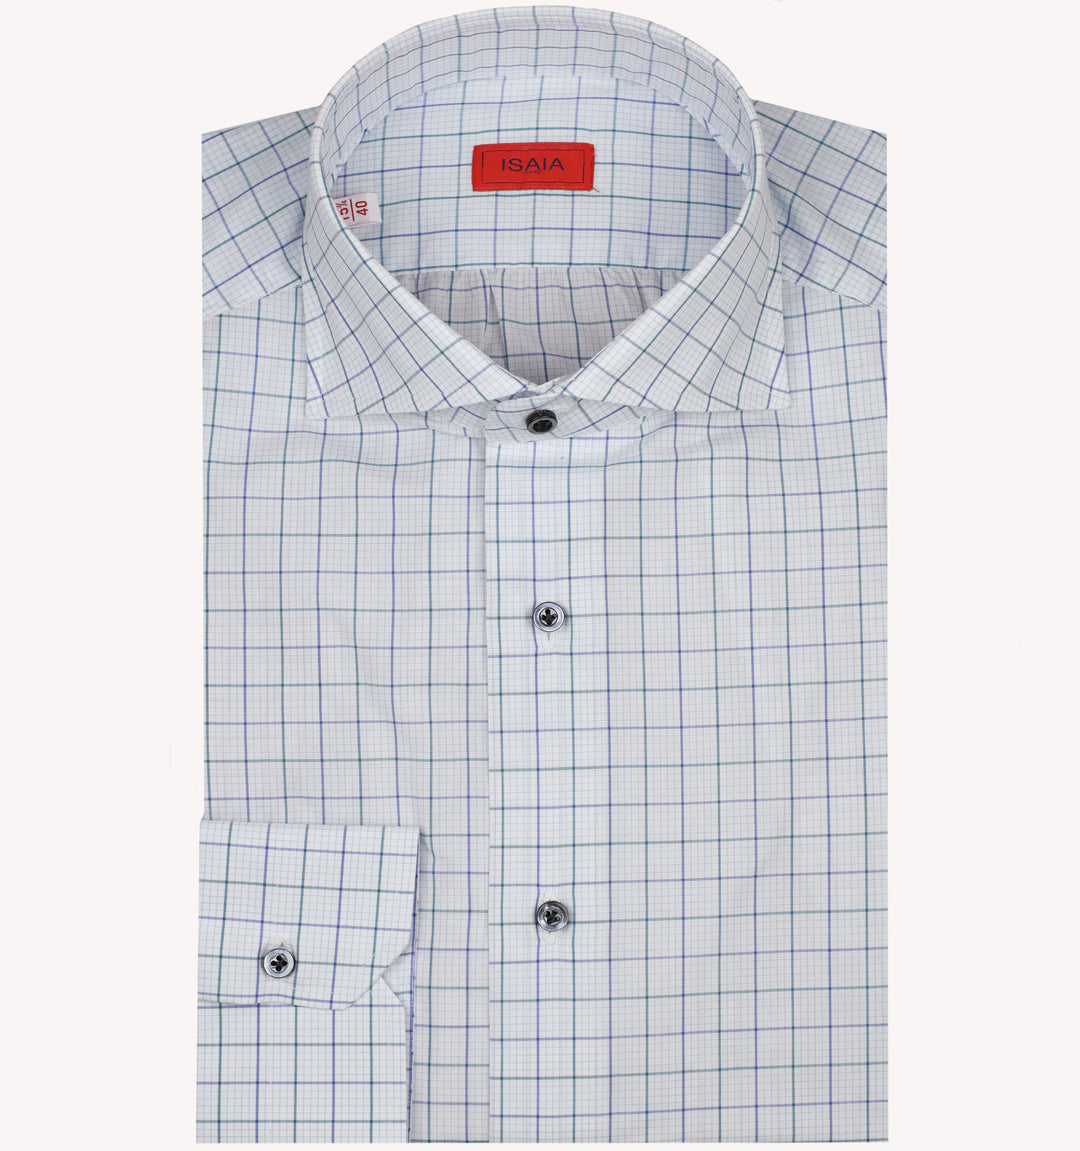 Isaia Check Dress Shirt in Blue Teal